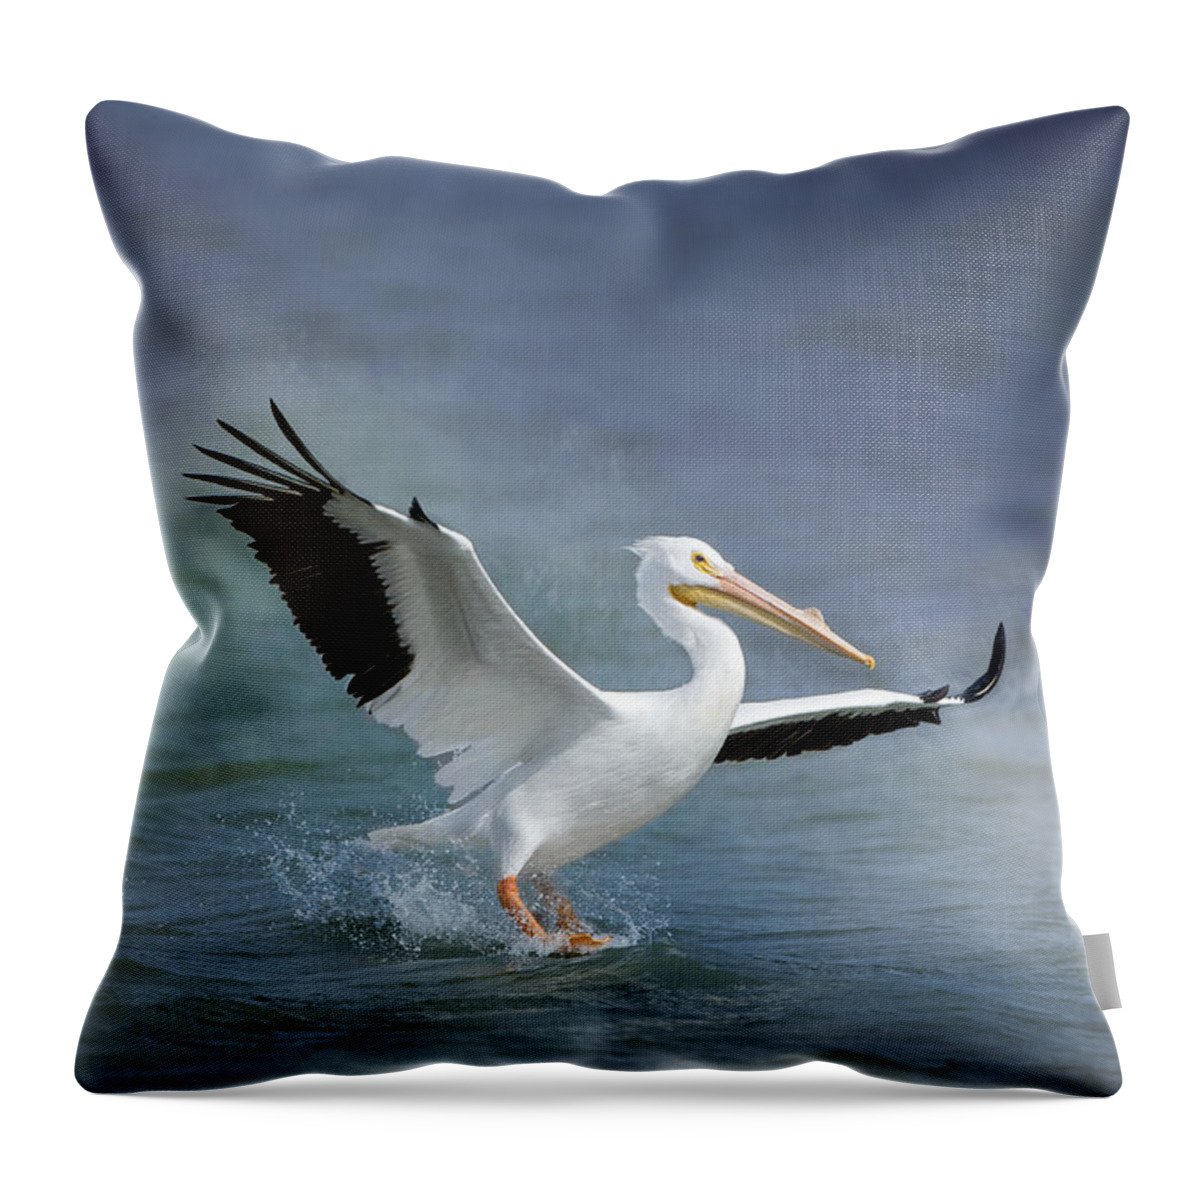 American White Pelican Throw Pillow featuring the photograph American White Pelican by Bonnie Barry